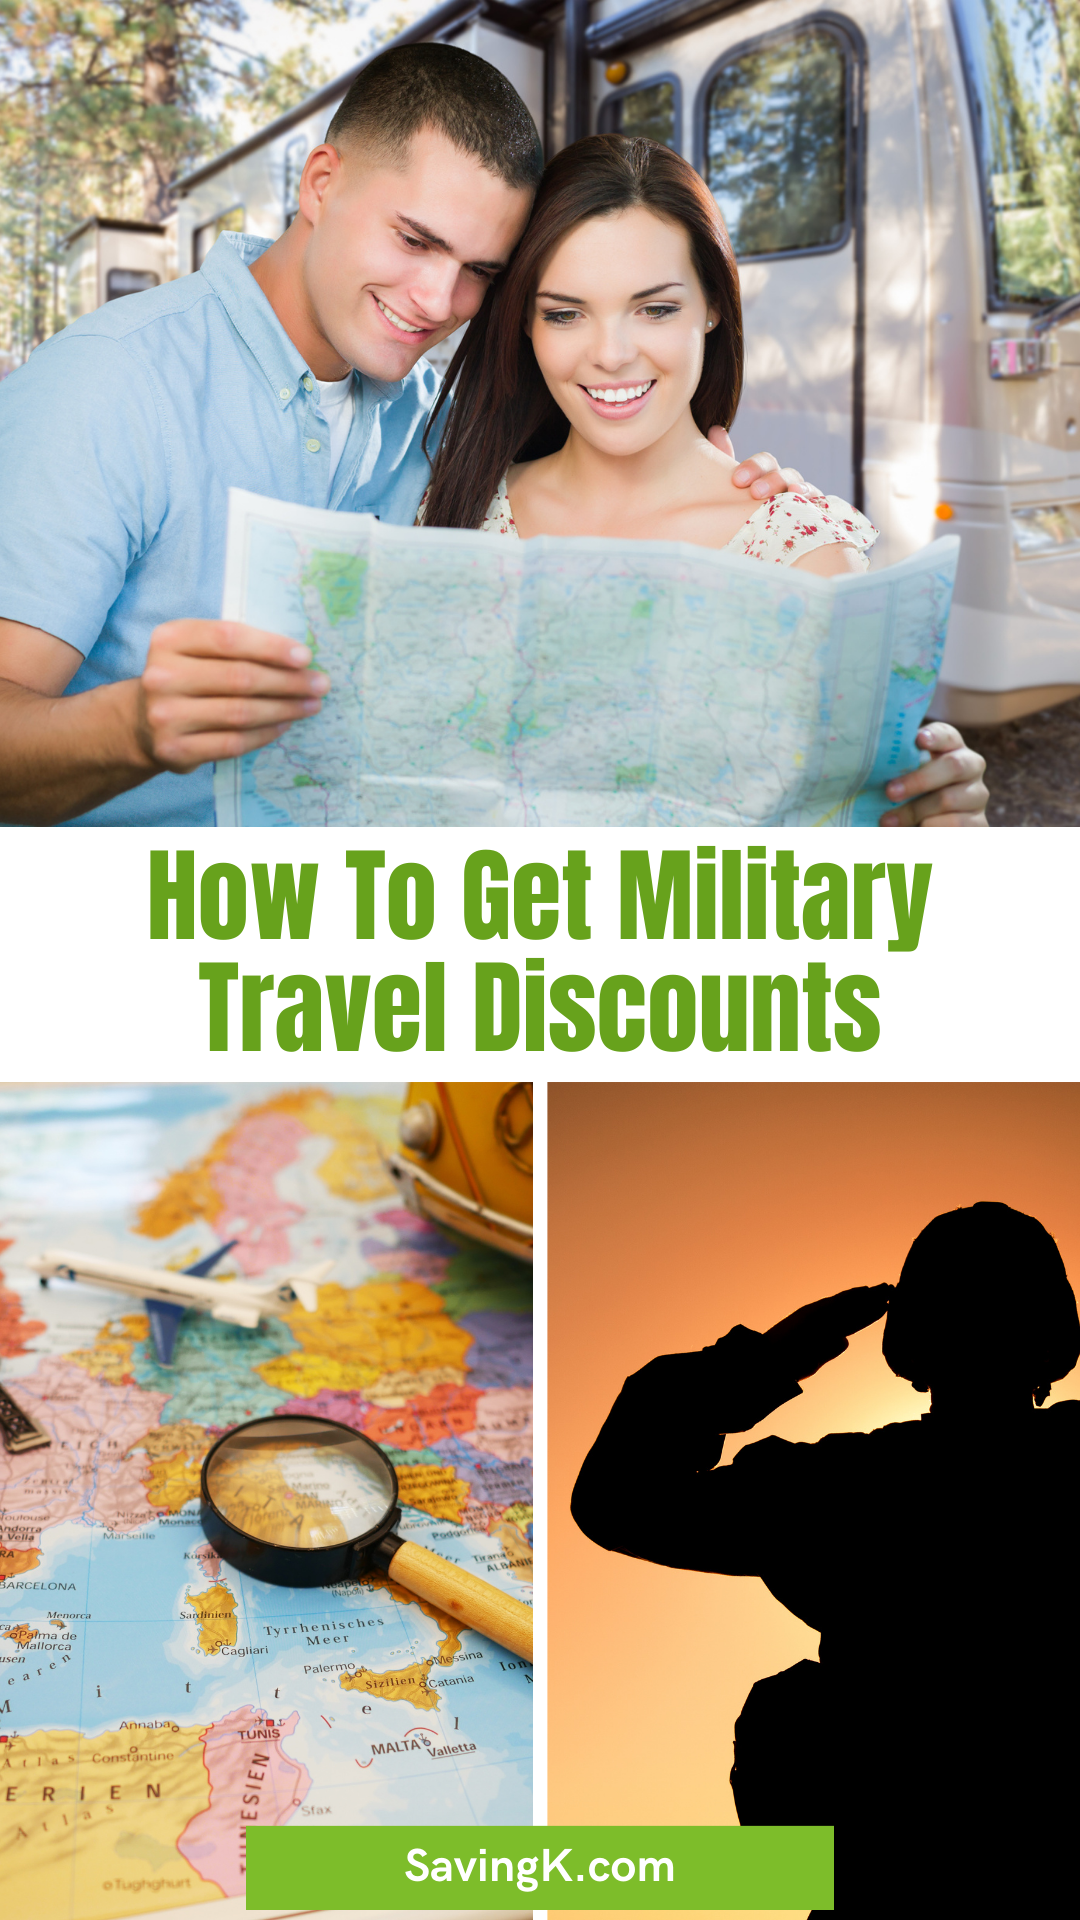 How To Get Military Travel Discounts